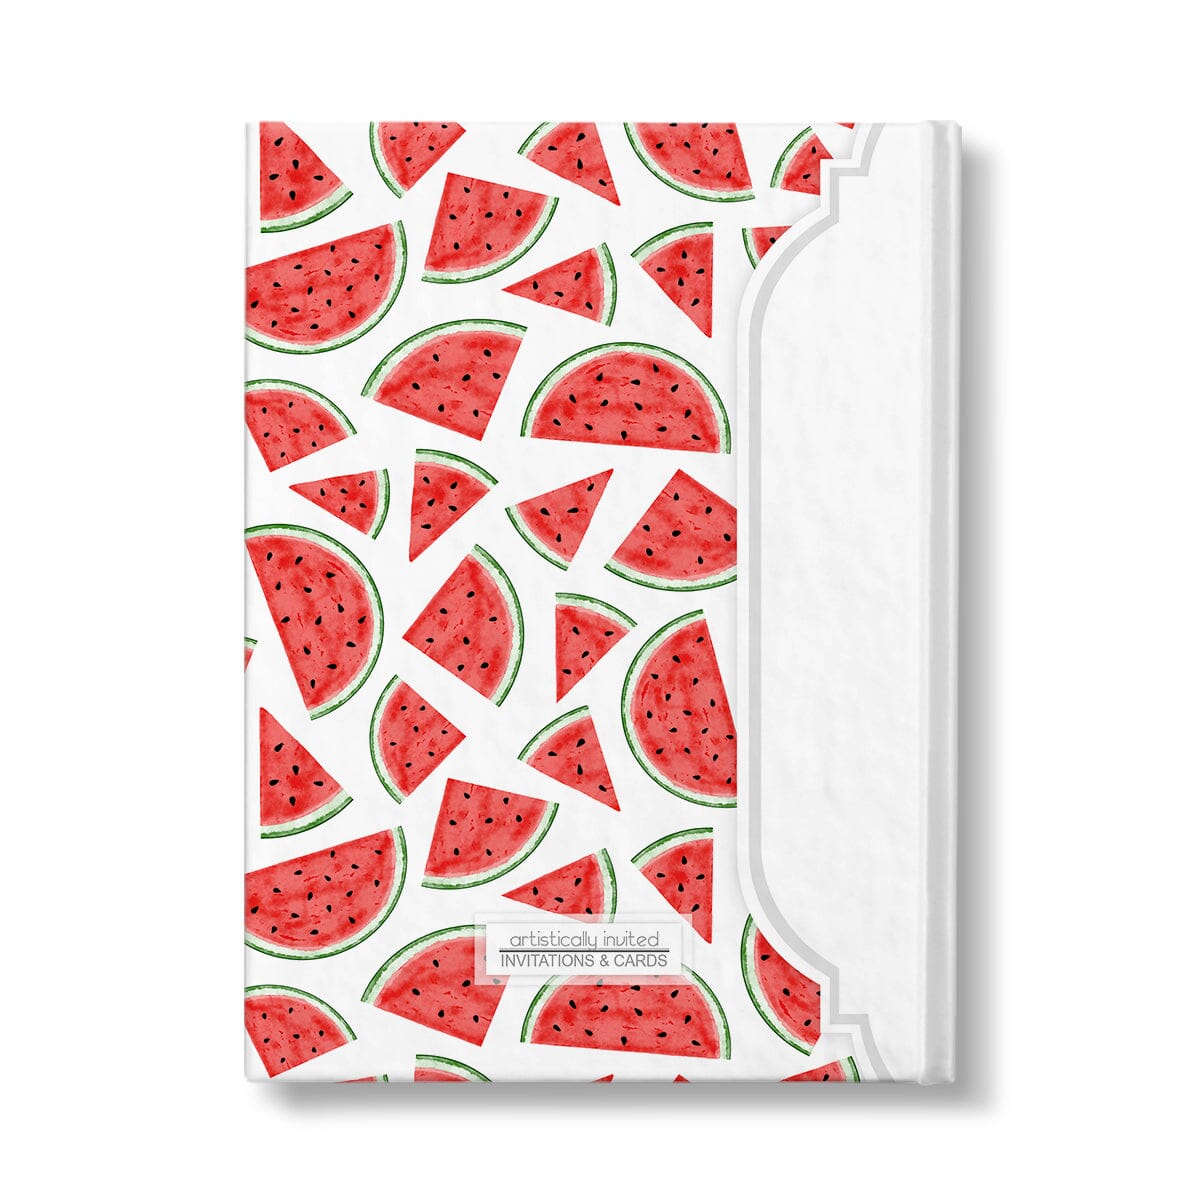 Personalized Watermelon Slices Journal at Artistically Invited. Back side of the book.